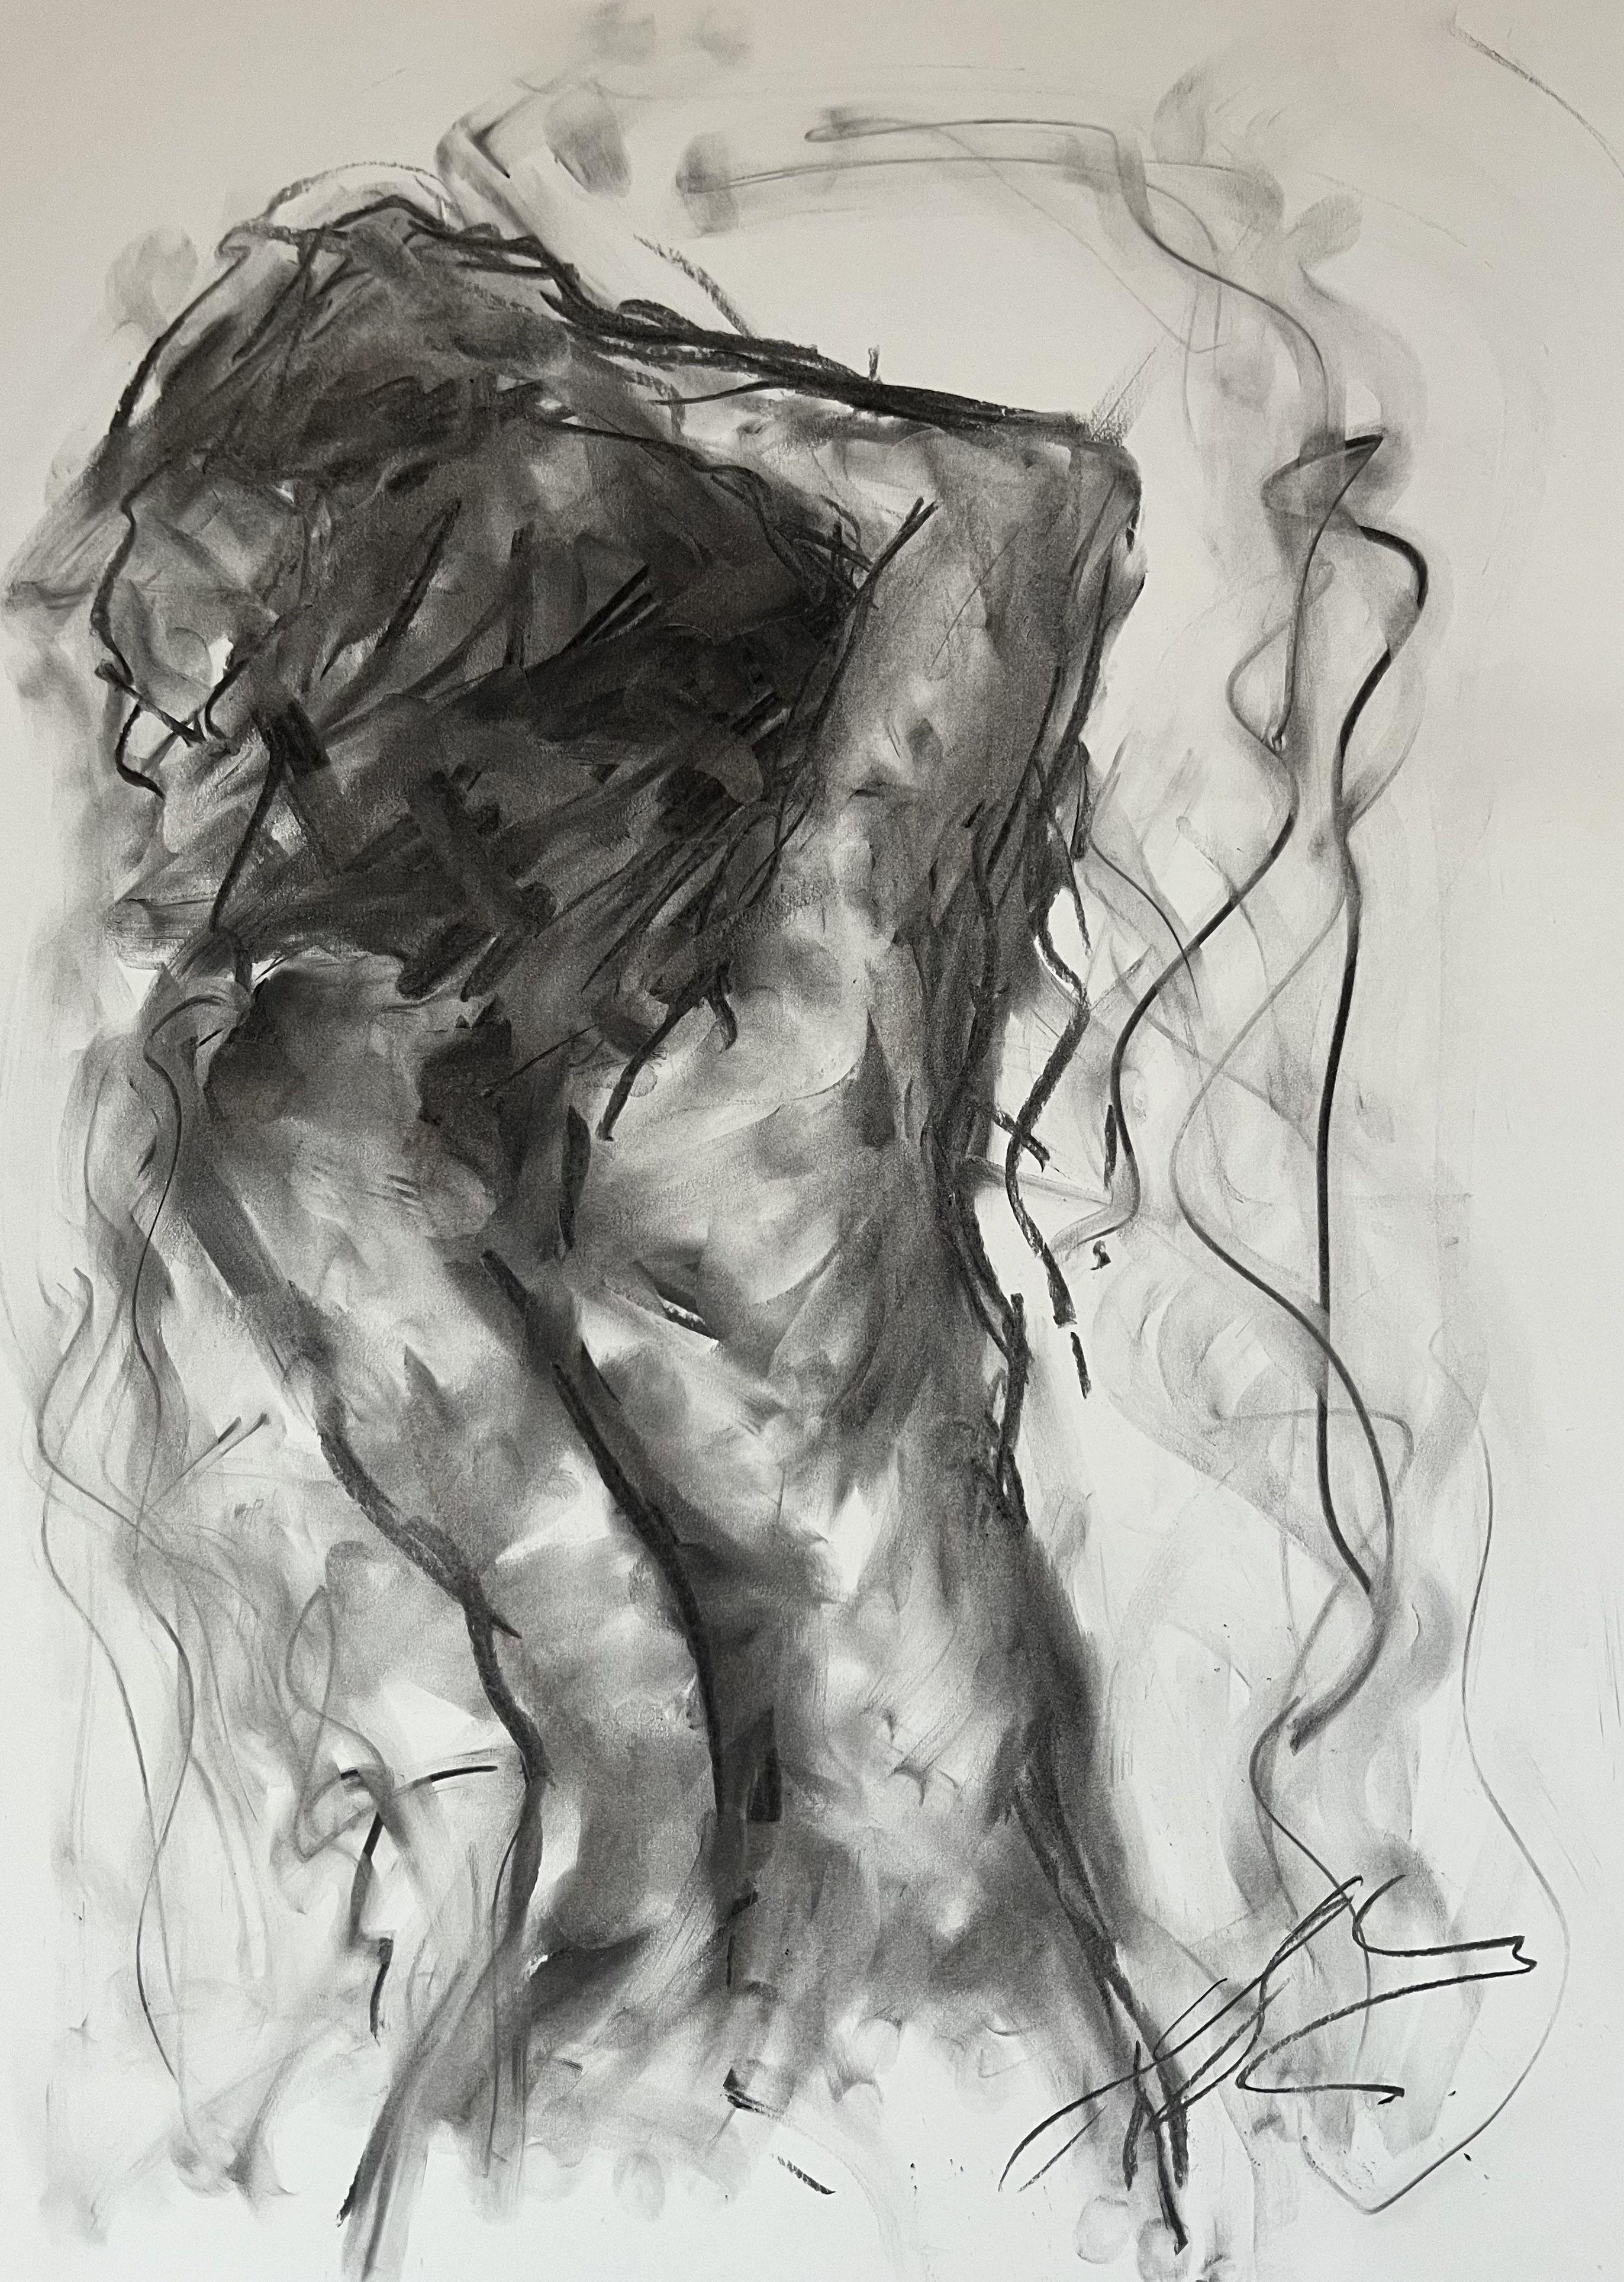 Intense, Drawing, Charcoal on Paper - Art by James Shipton